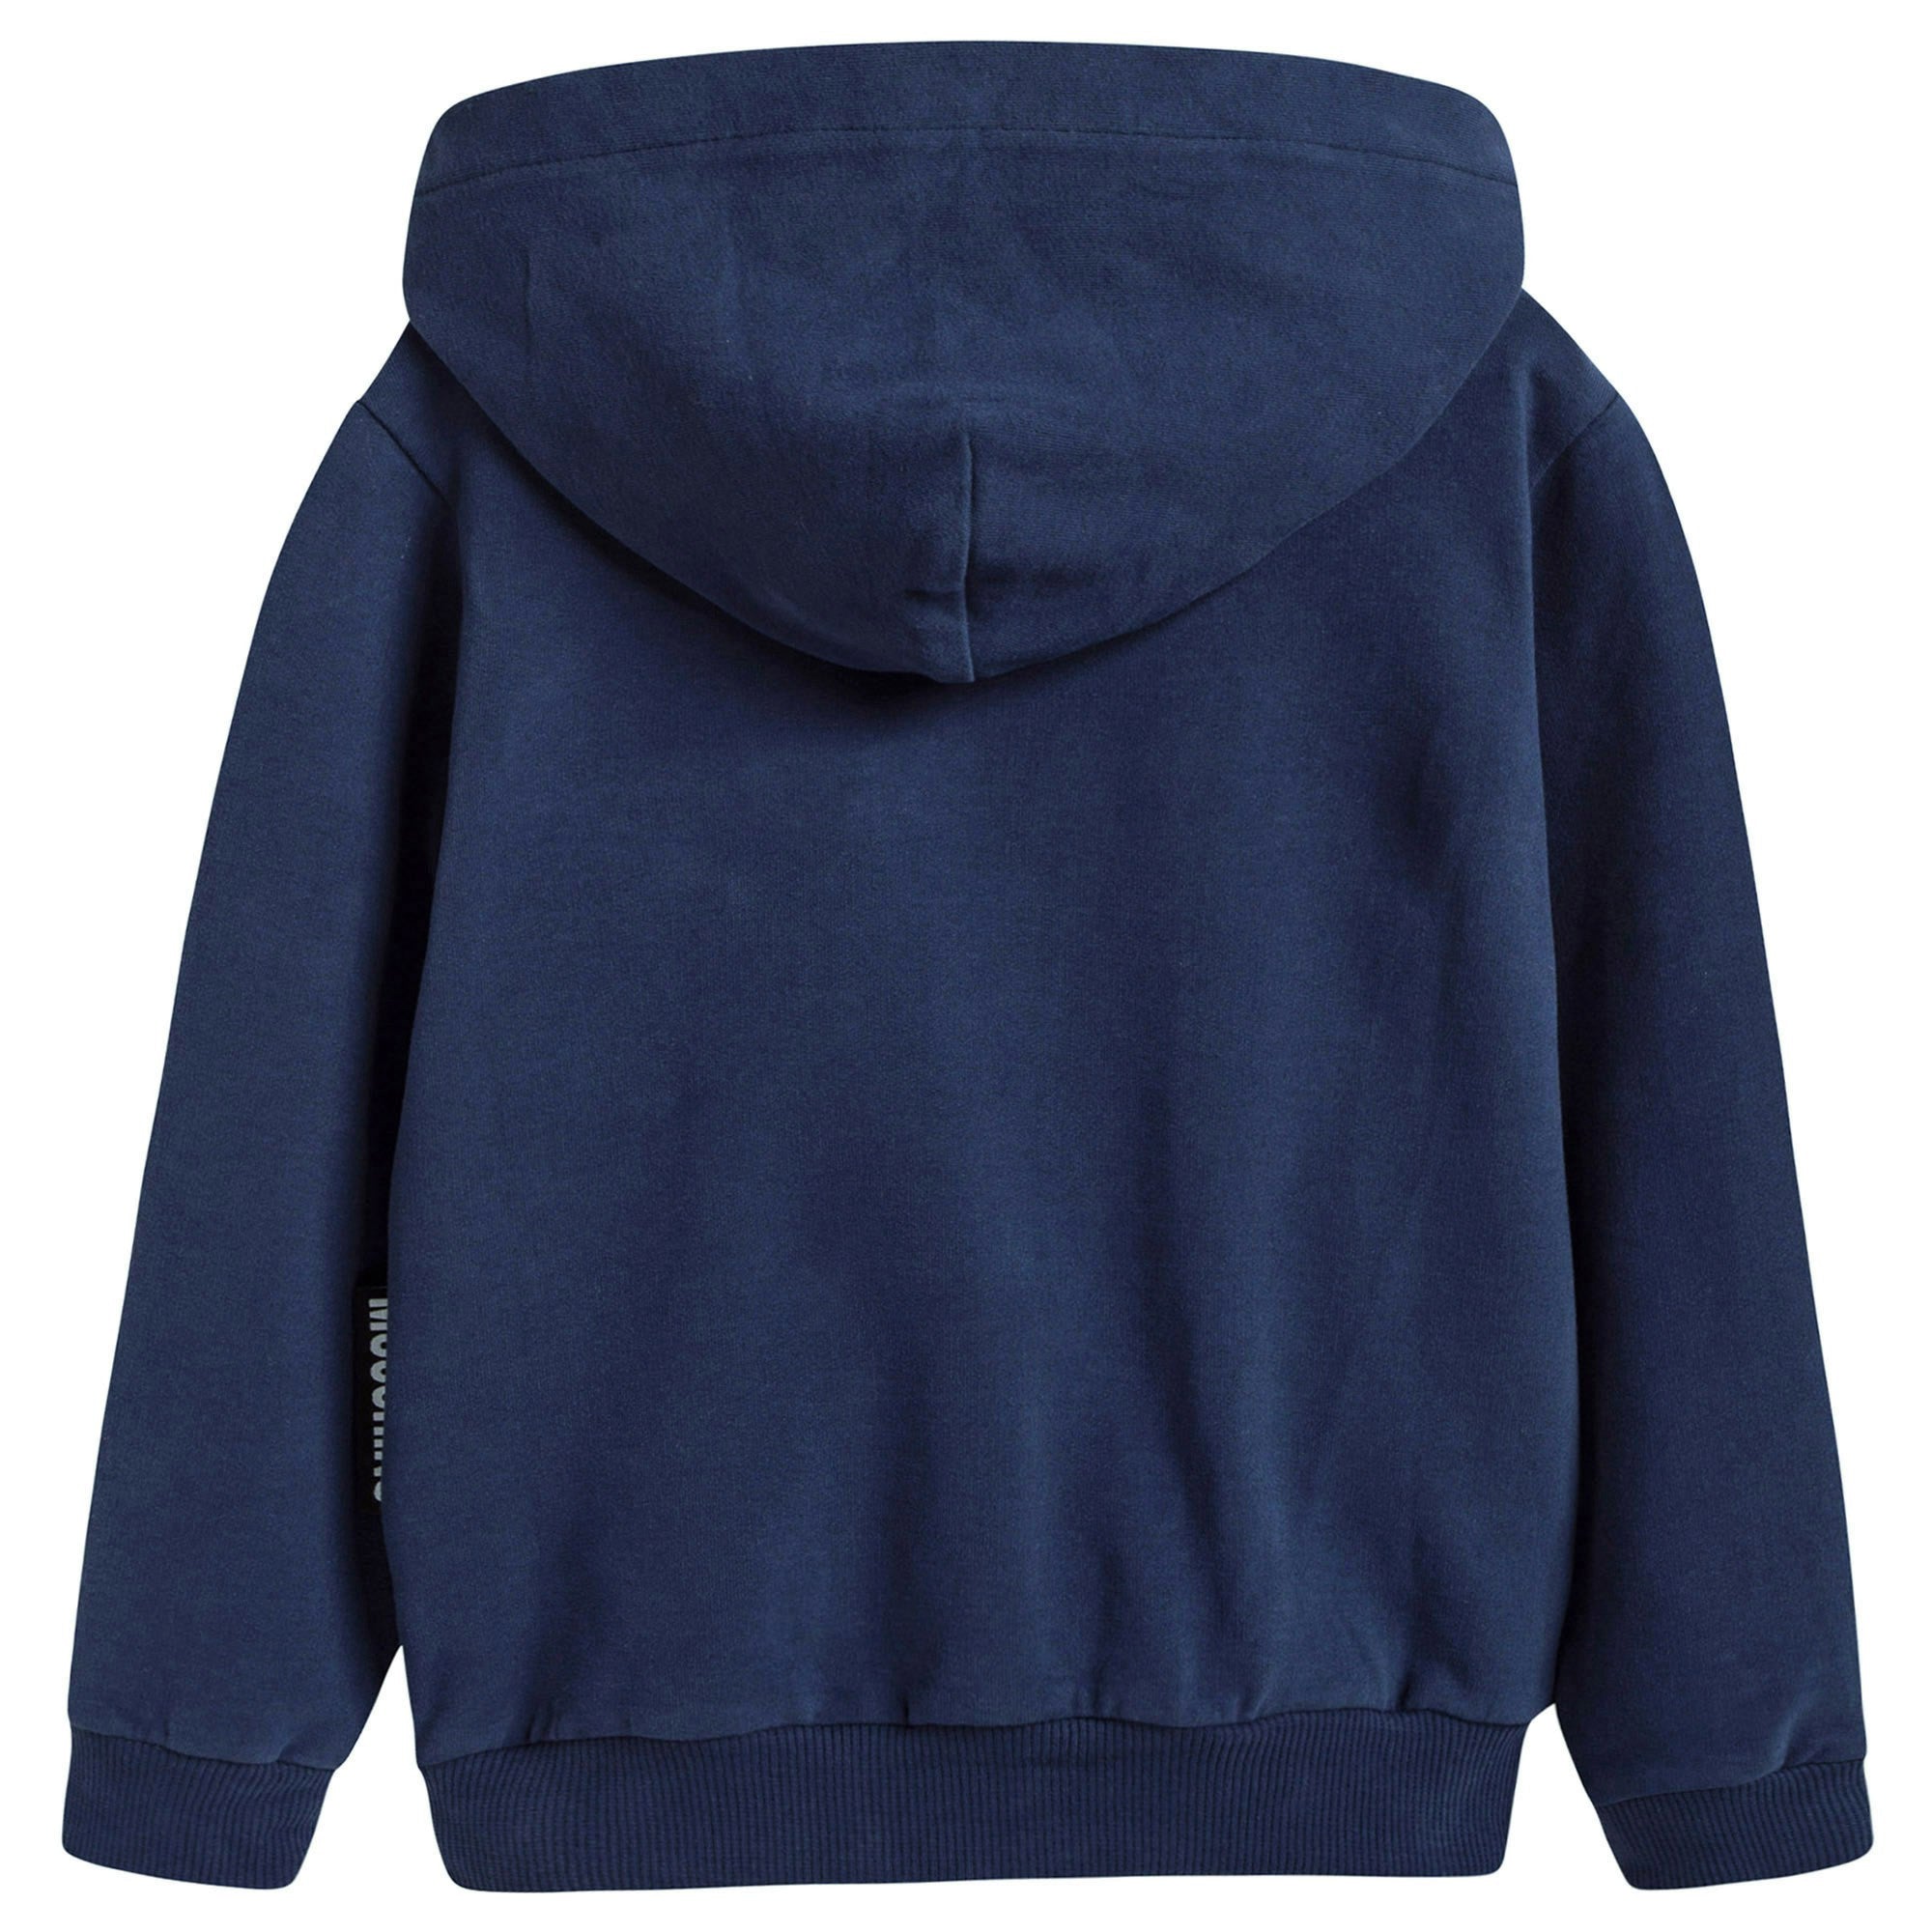 Baby Navy Blue Cotton Toy Tracksuit